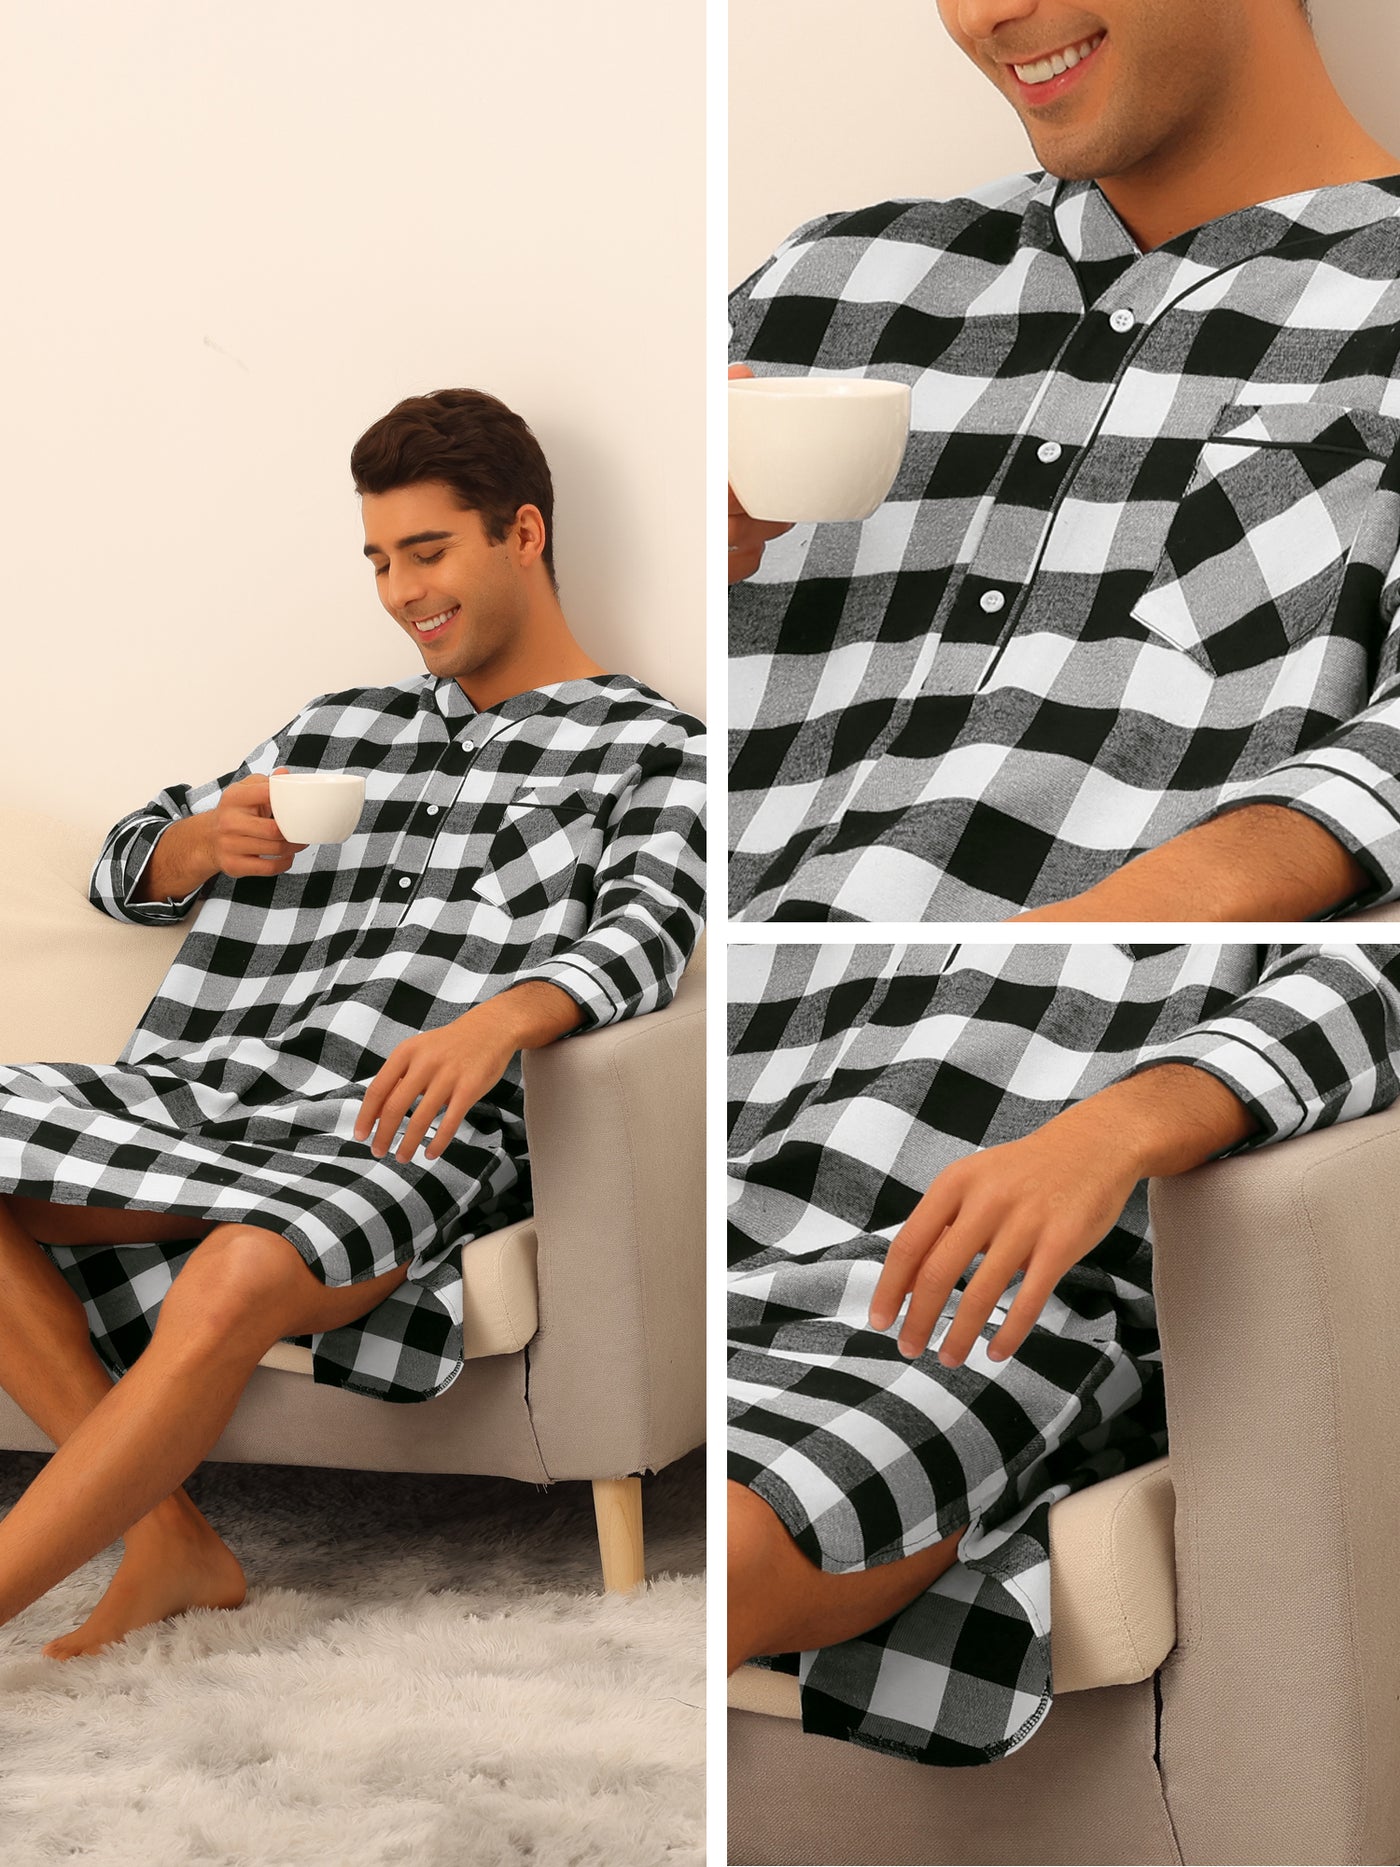 Bublédon Plaid Nightshirts for Men's Loose Fit Henley Neck Checked Pajamas Sleepwear